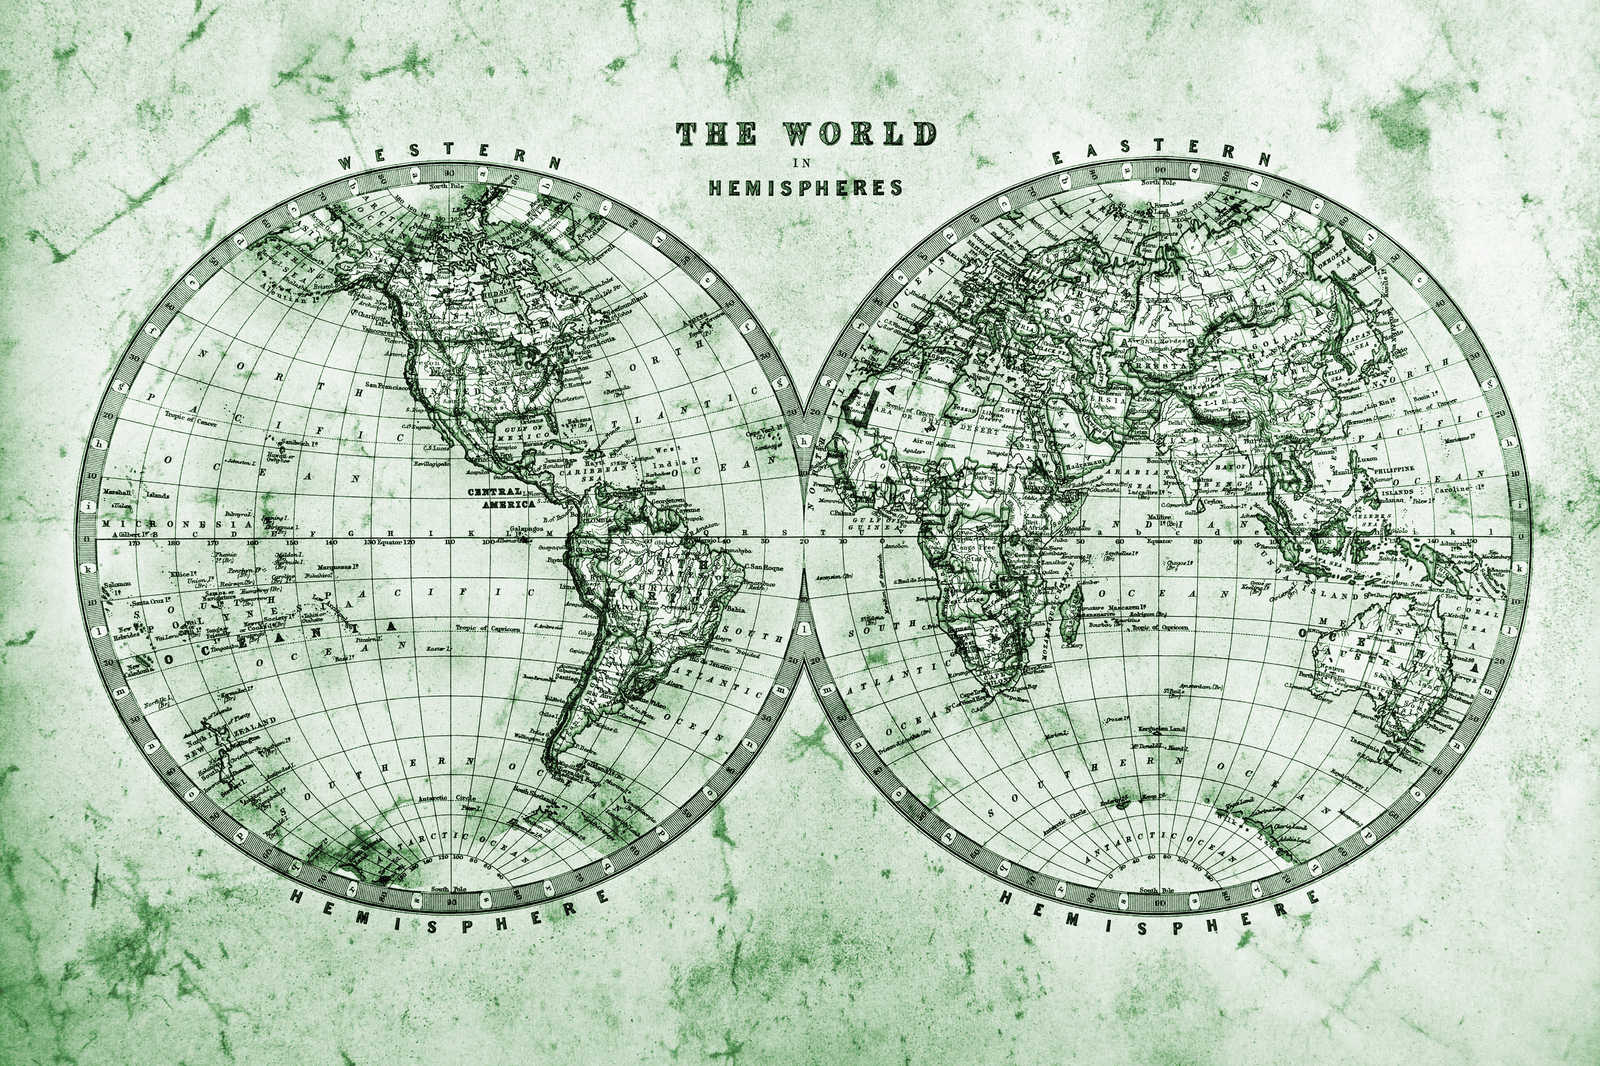             Canvas with Vintage World Map in Hemispheres | green, grey, white - 0.90 m x 0.60 m
        